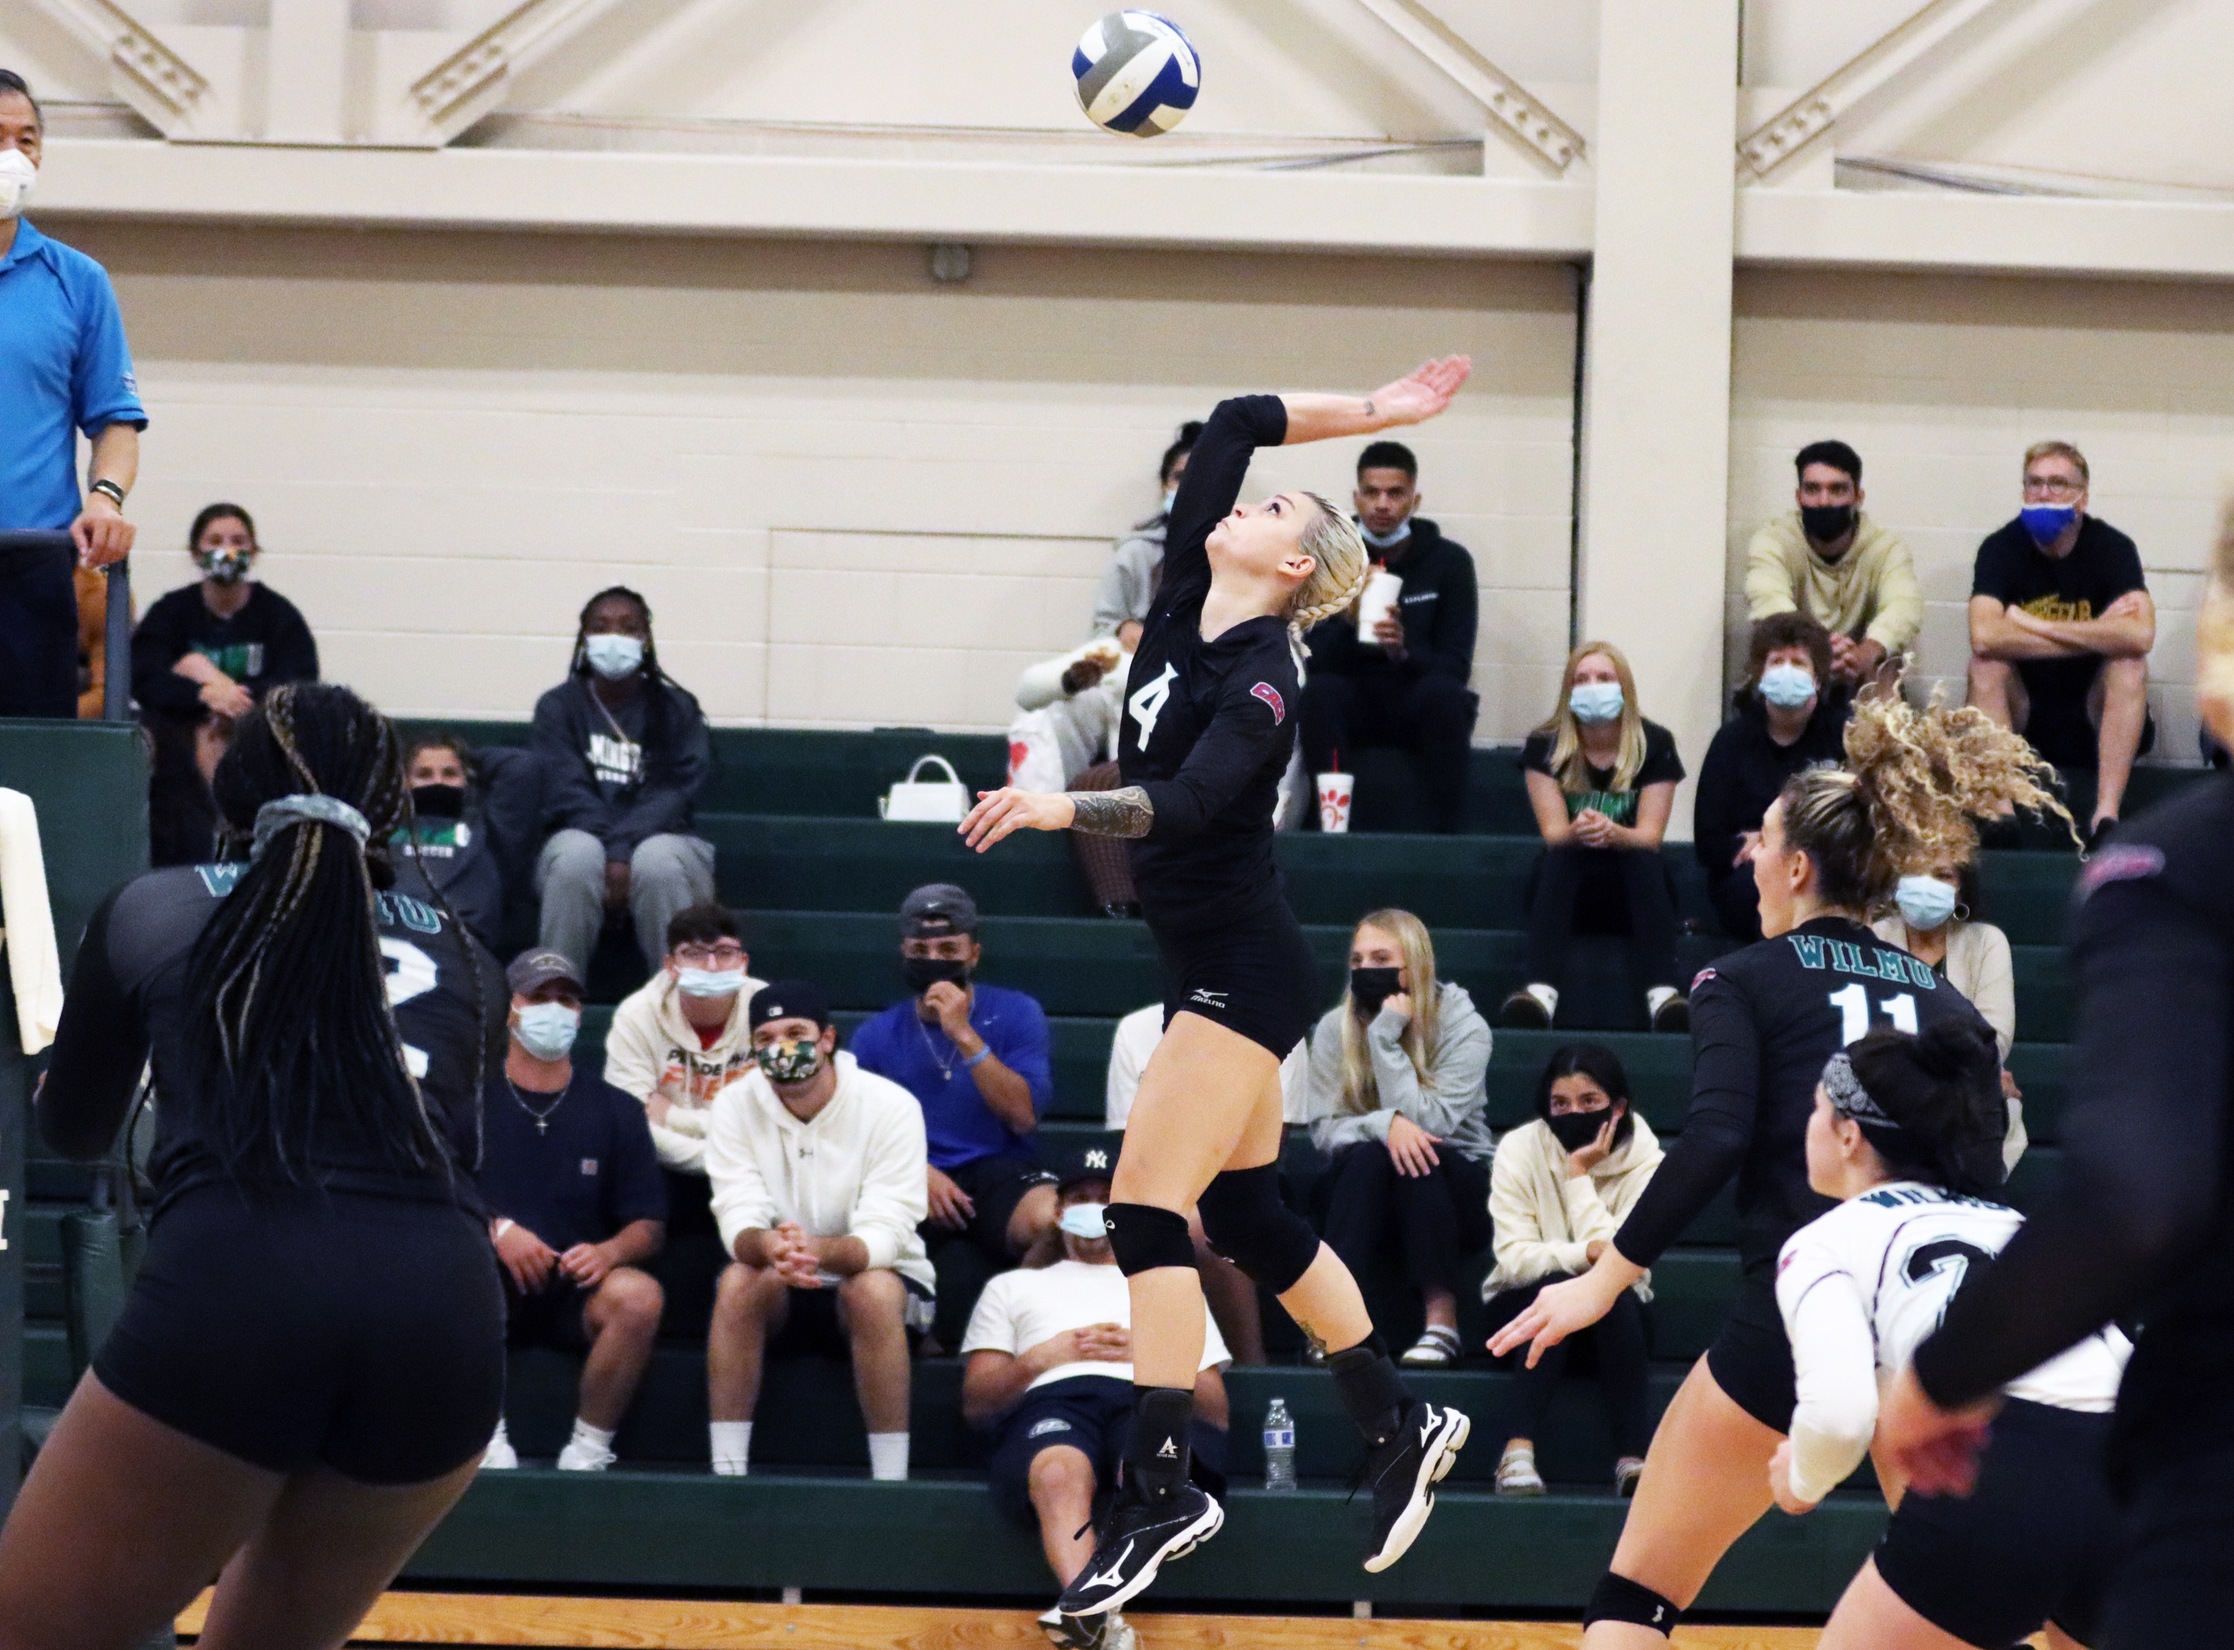 Photo of Mandy Behiels putting down one of her 10 kills against USciences. Copyright 2021; Wilmington University. All rights reserved. Photo by Dan Lauletta